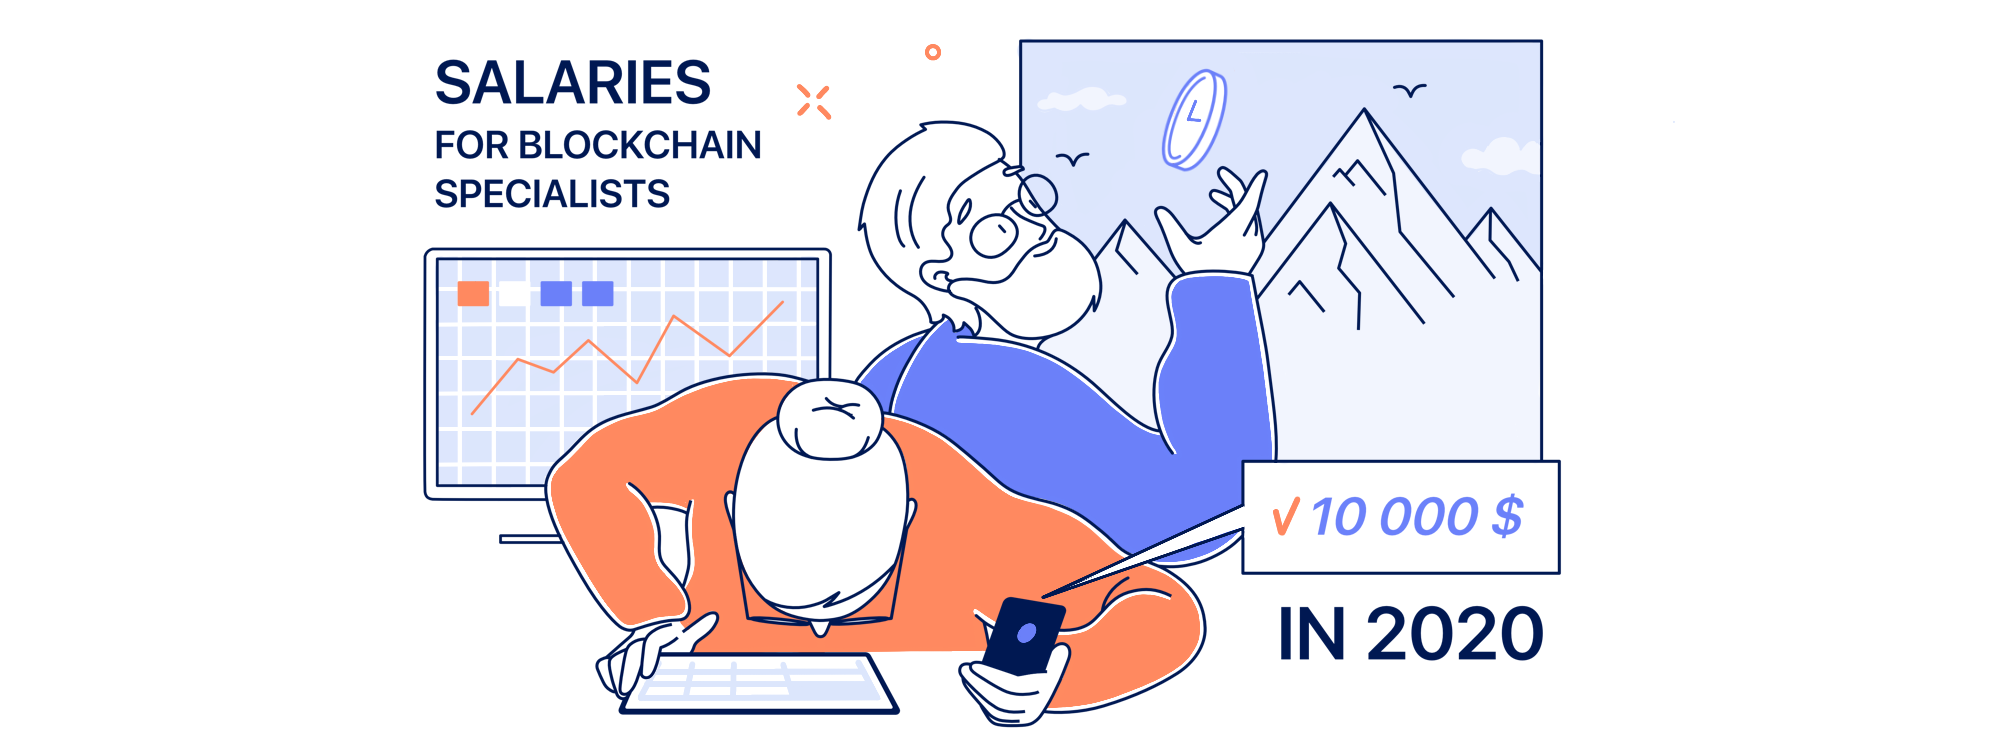 Salaries for blockchain specialists in 2020